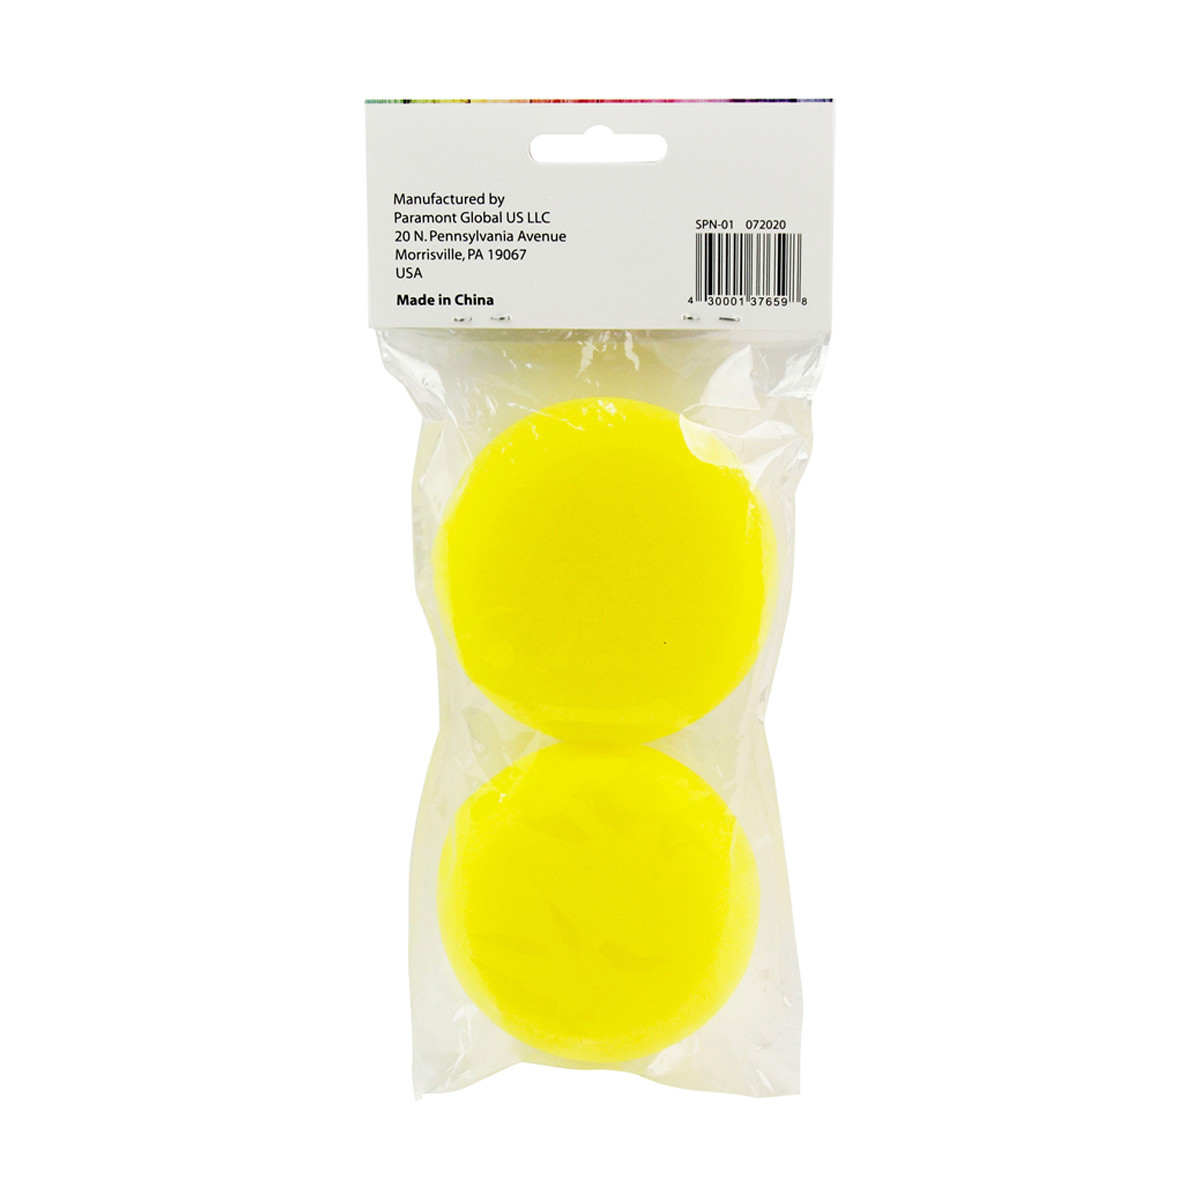 Make Shoppe Round Art Sponges, 2 Count Yellow